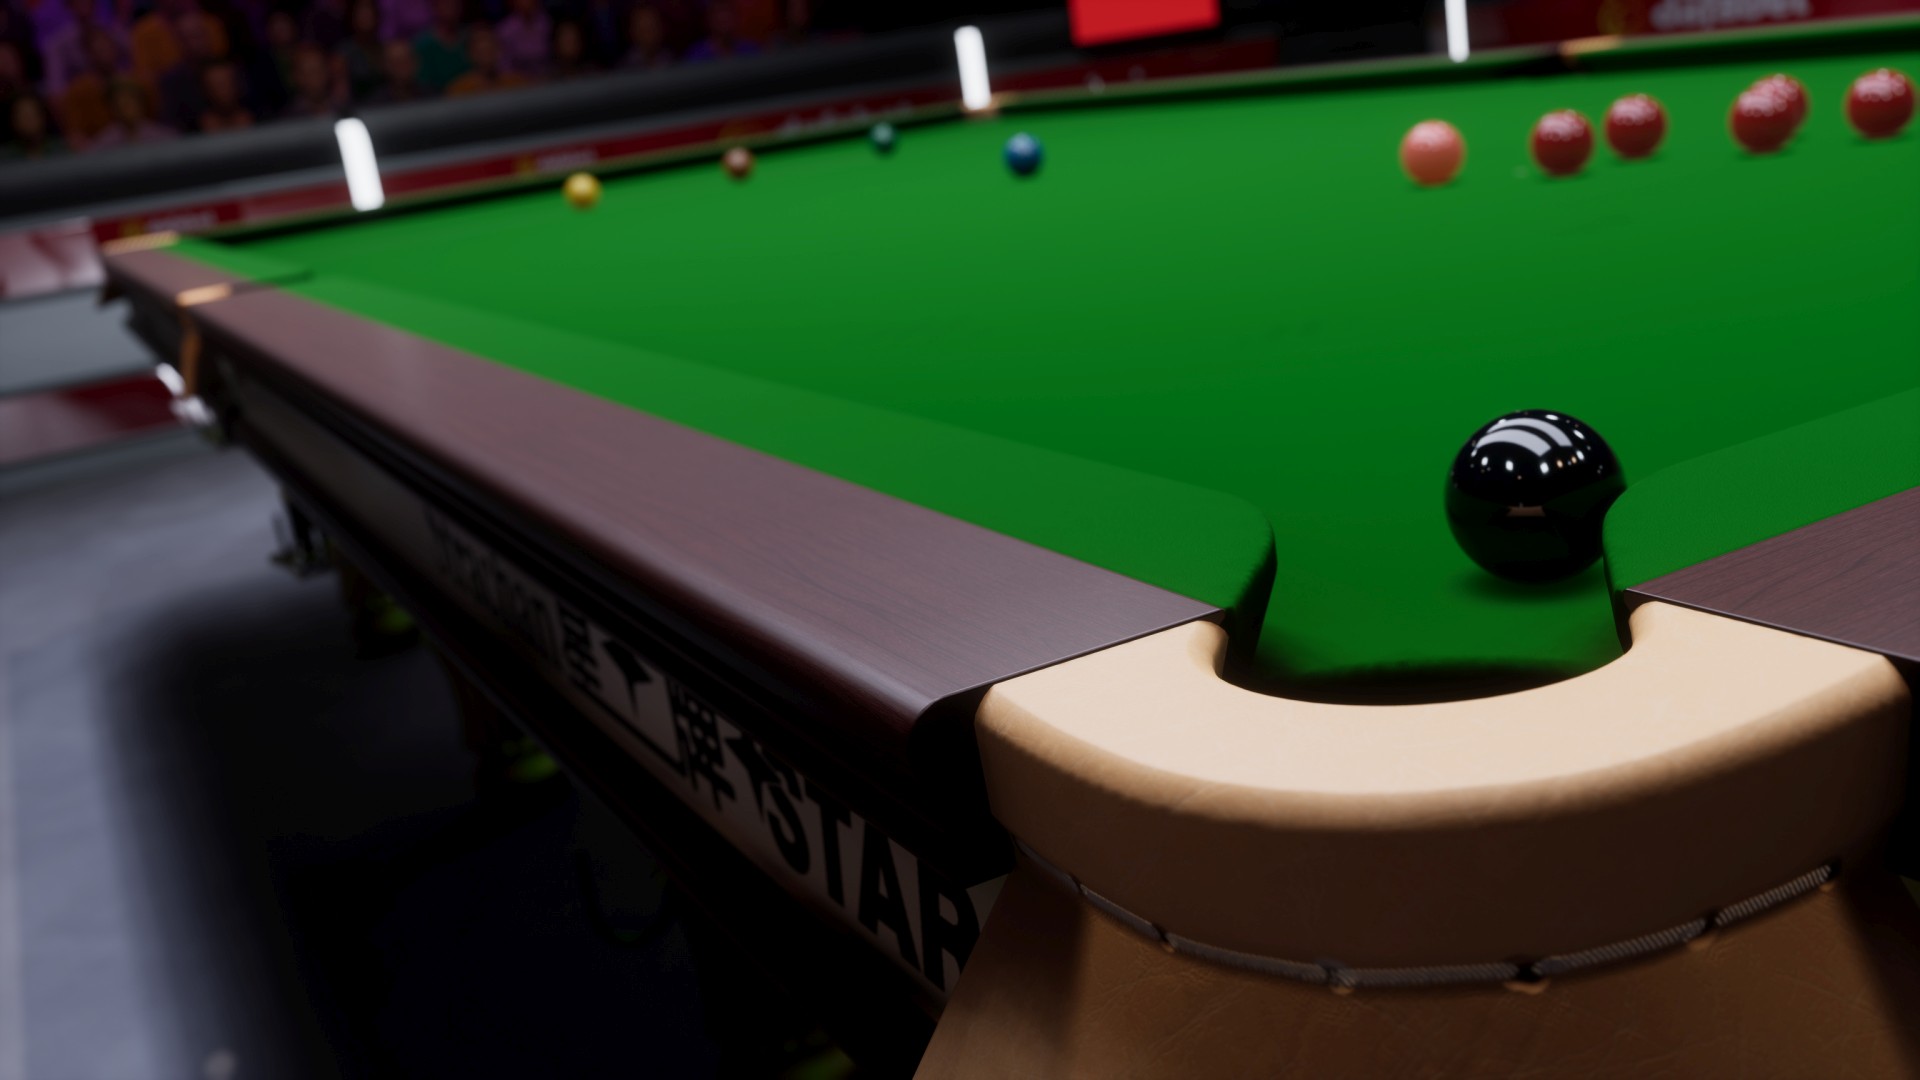 Pocket Snooker 19 on Xbox One Today